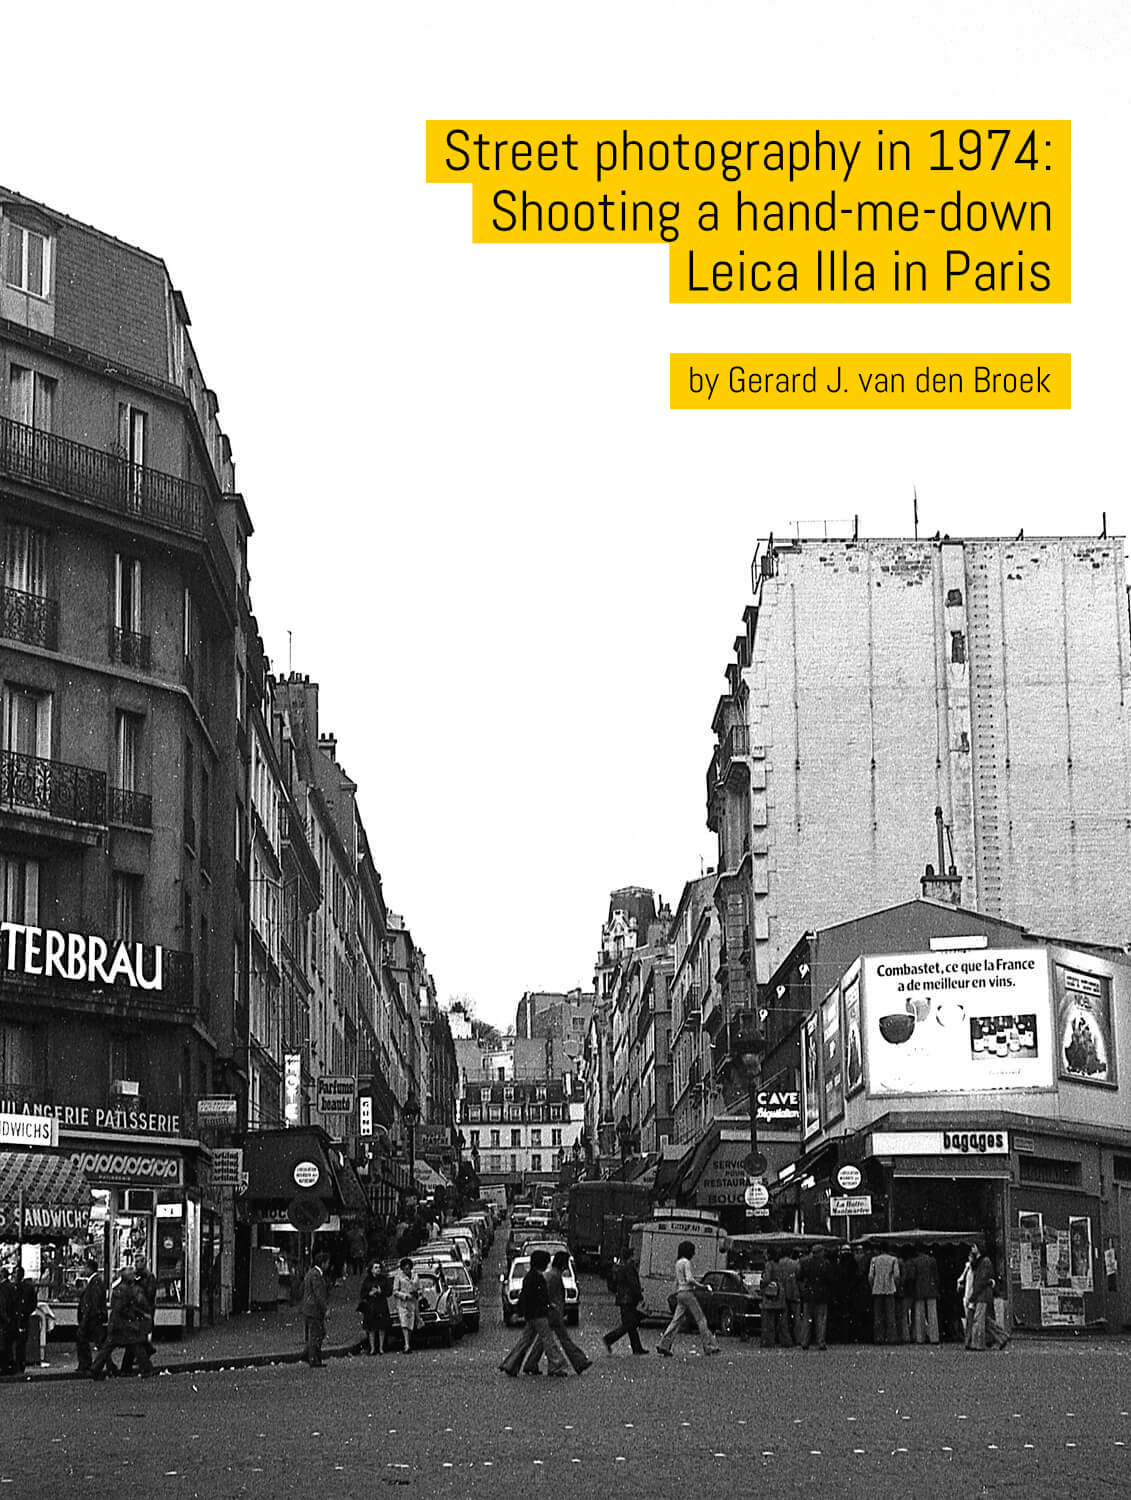 Street photography in 1974: Shooting a hand-me-down Leica llla in